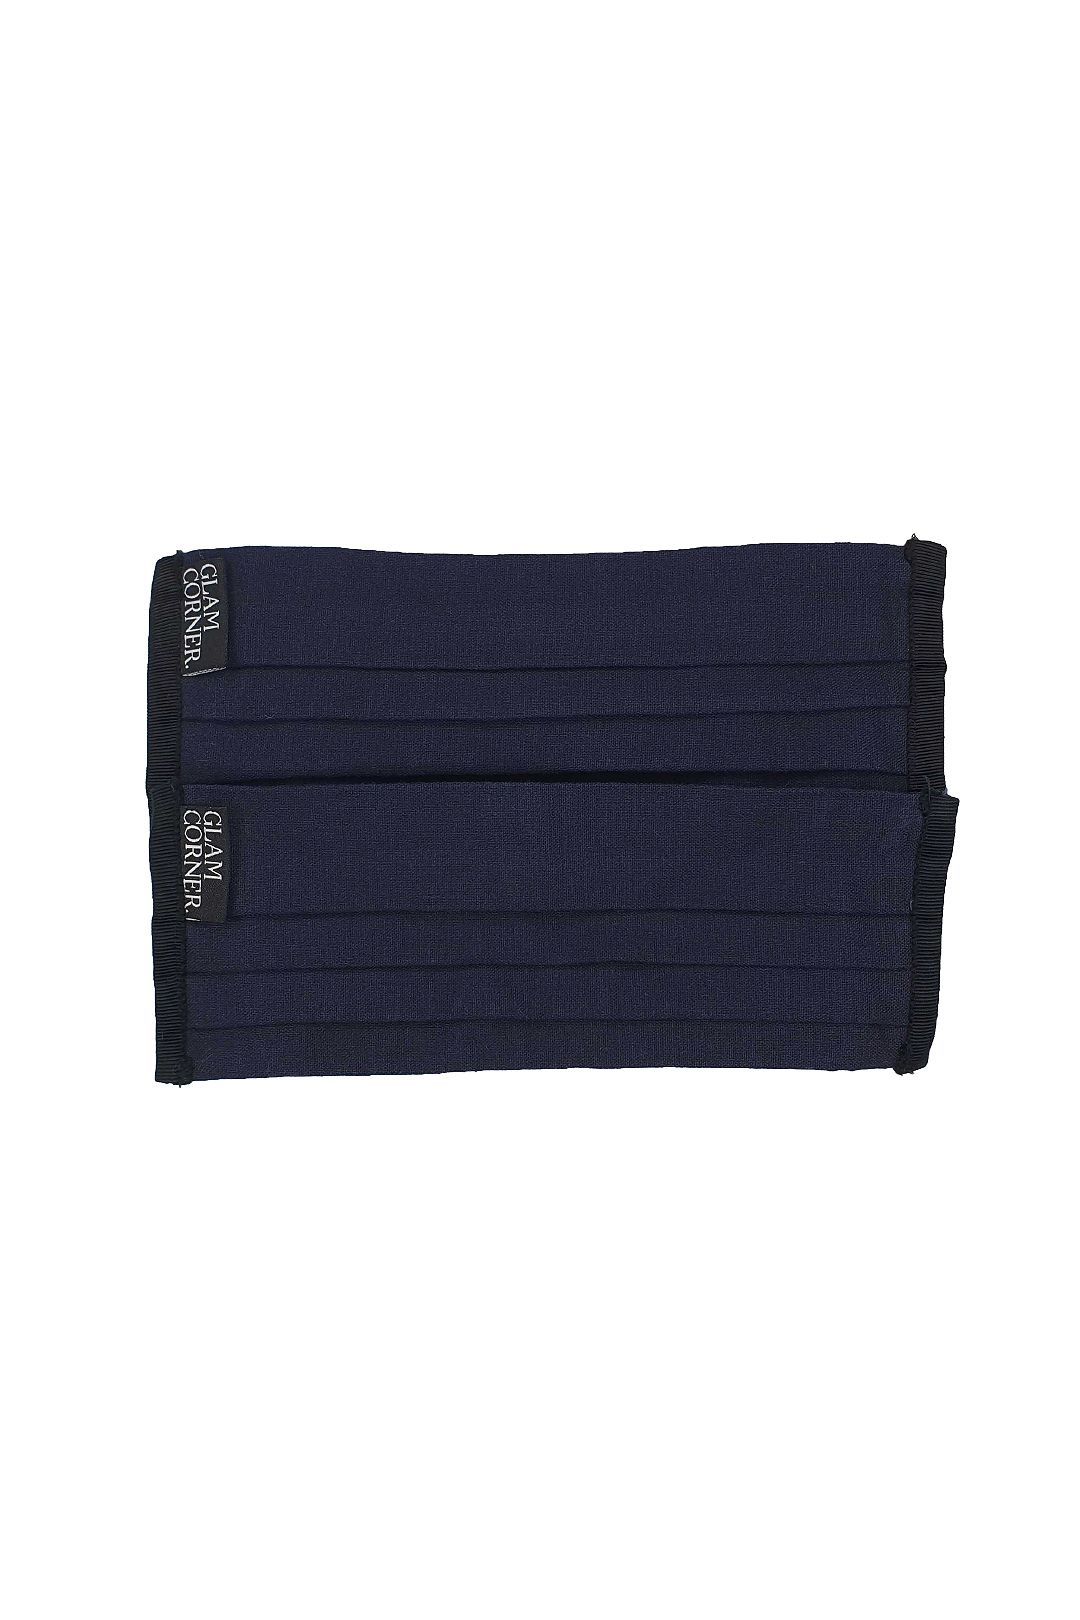 Dress-For-Success-2-Pack-Mask-Navy